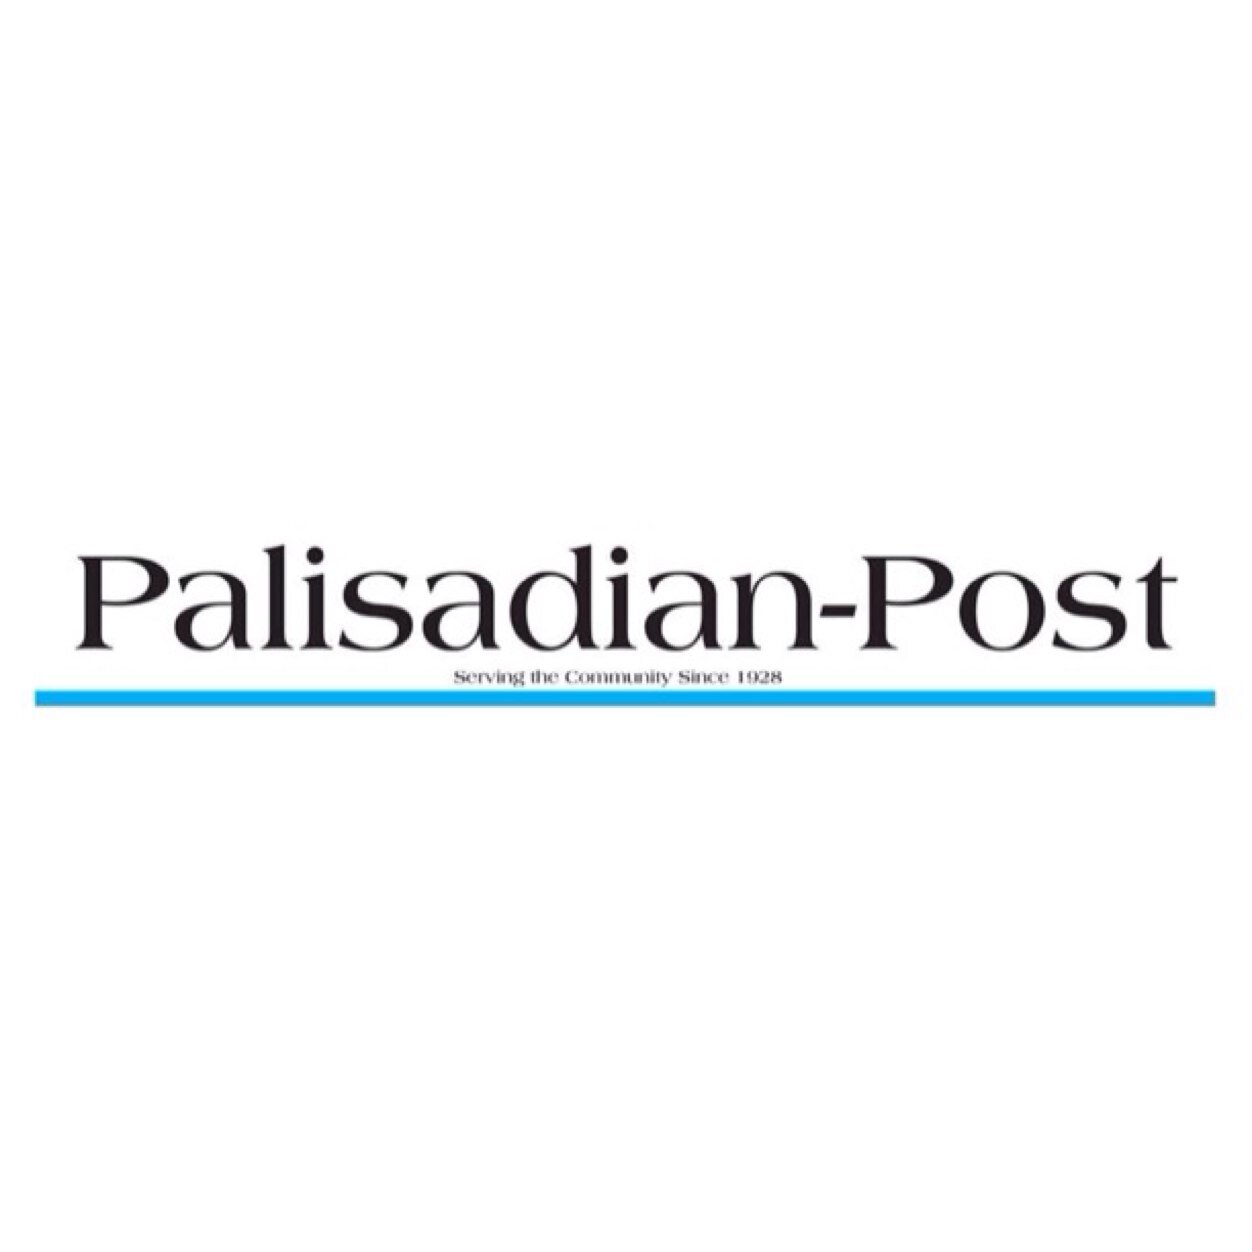 Established in 1928, the Palisadian-Post is the only newspaper offering complete coverage of Pacific Palisades.